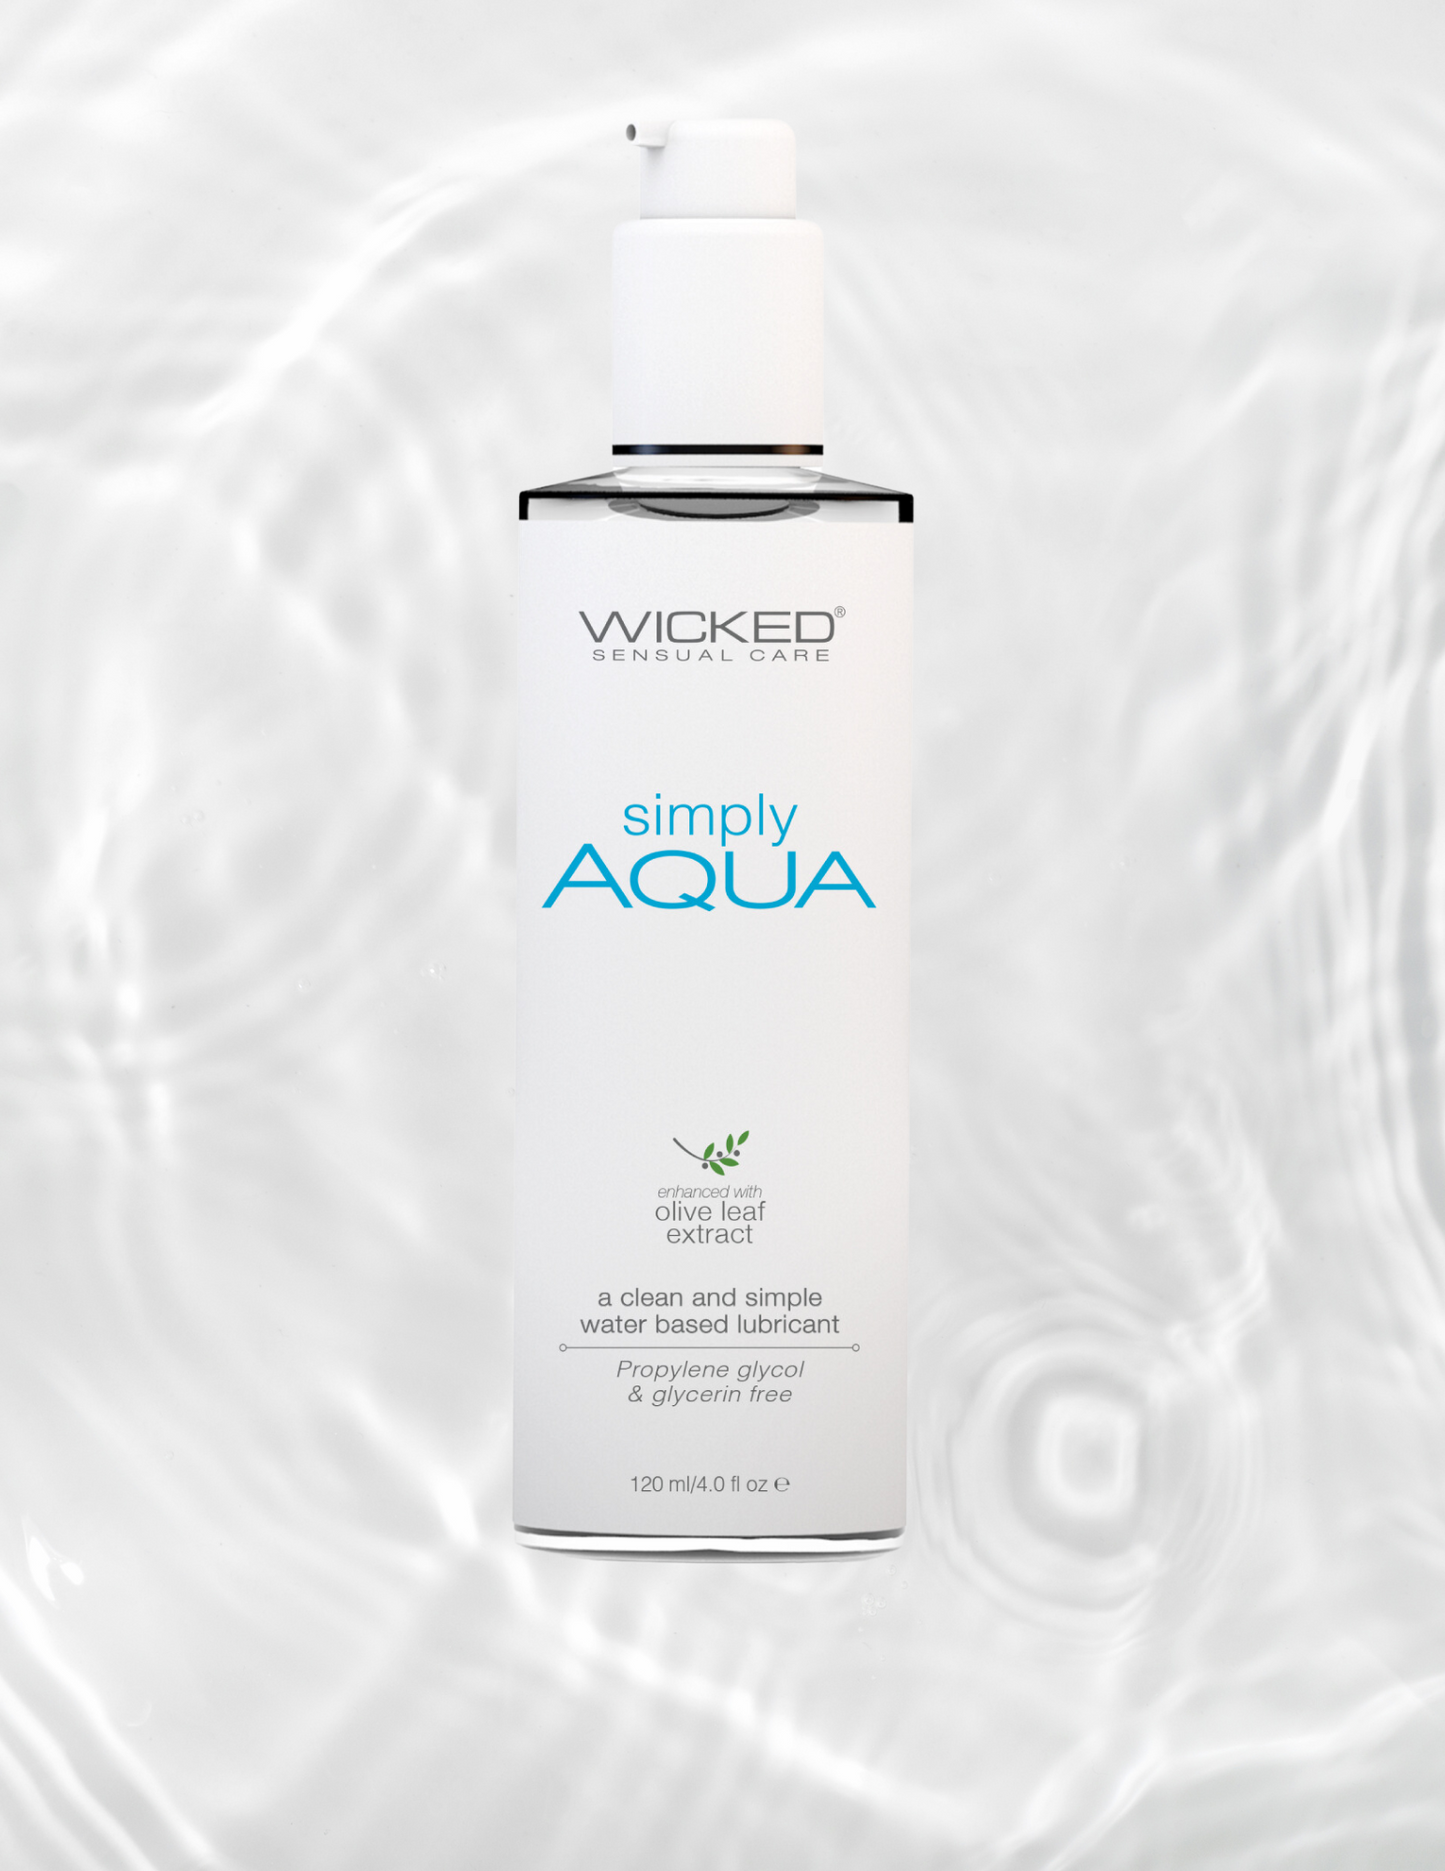 Wicked Sensual Care Simply Aqua Water Based Lubricant w/ Olive Leaf Extract bottle.